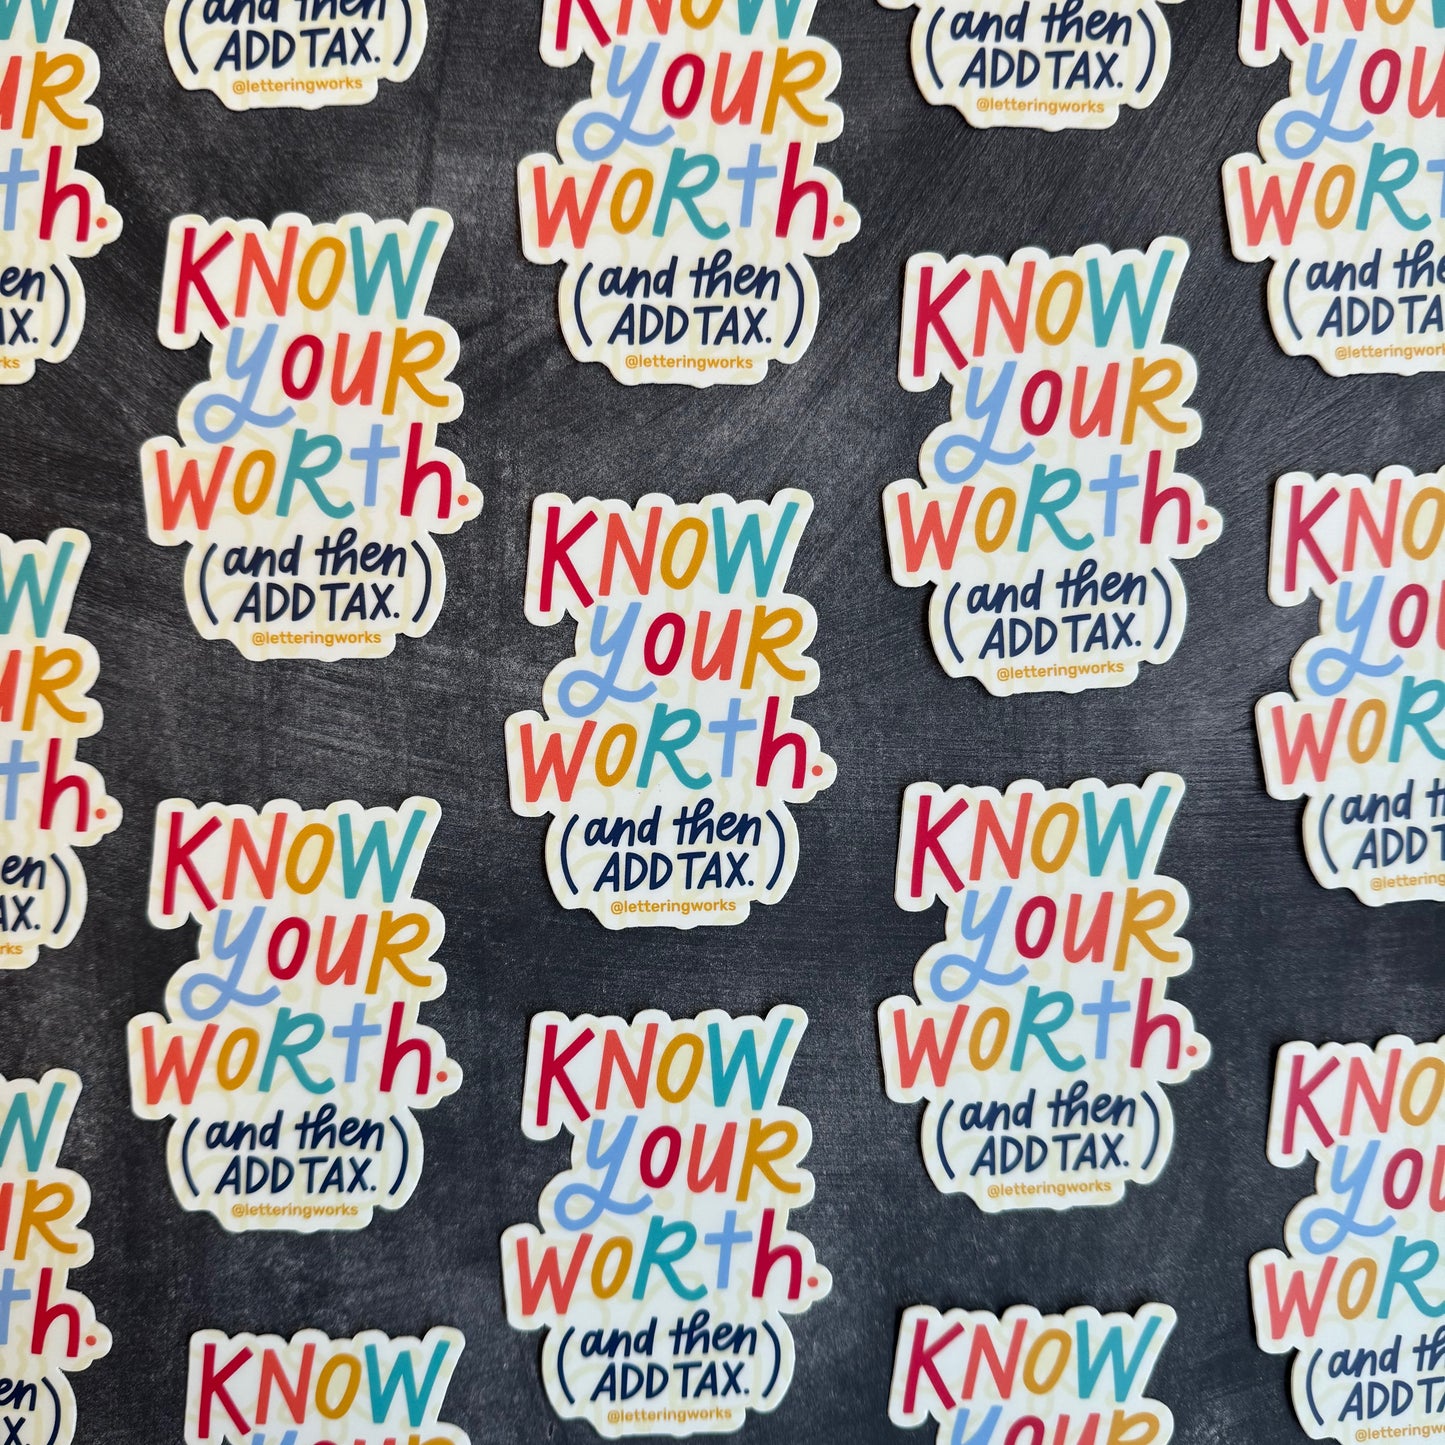 Know Your Worth (and Then Add Tax) Sticker